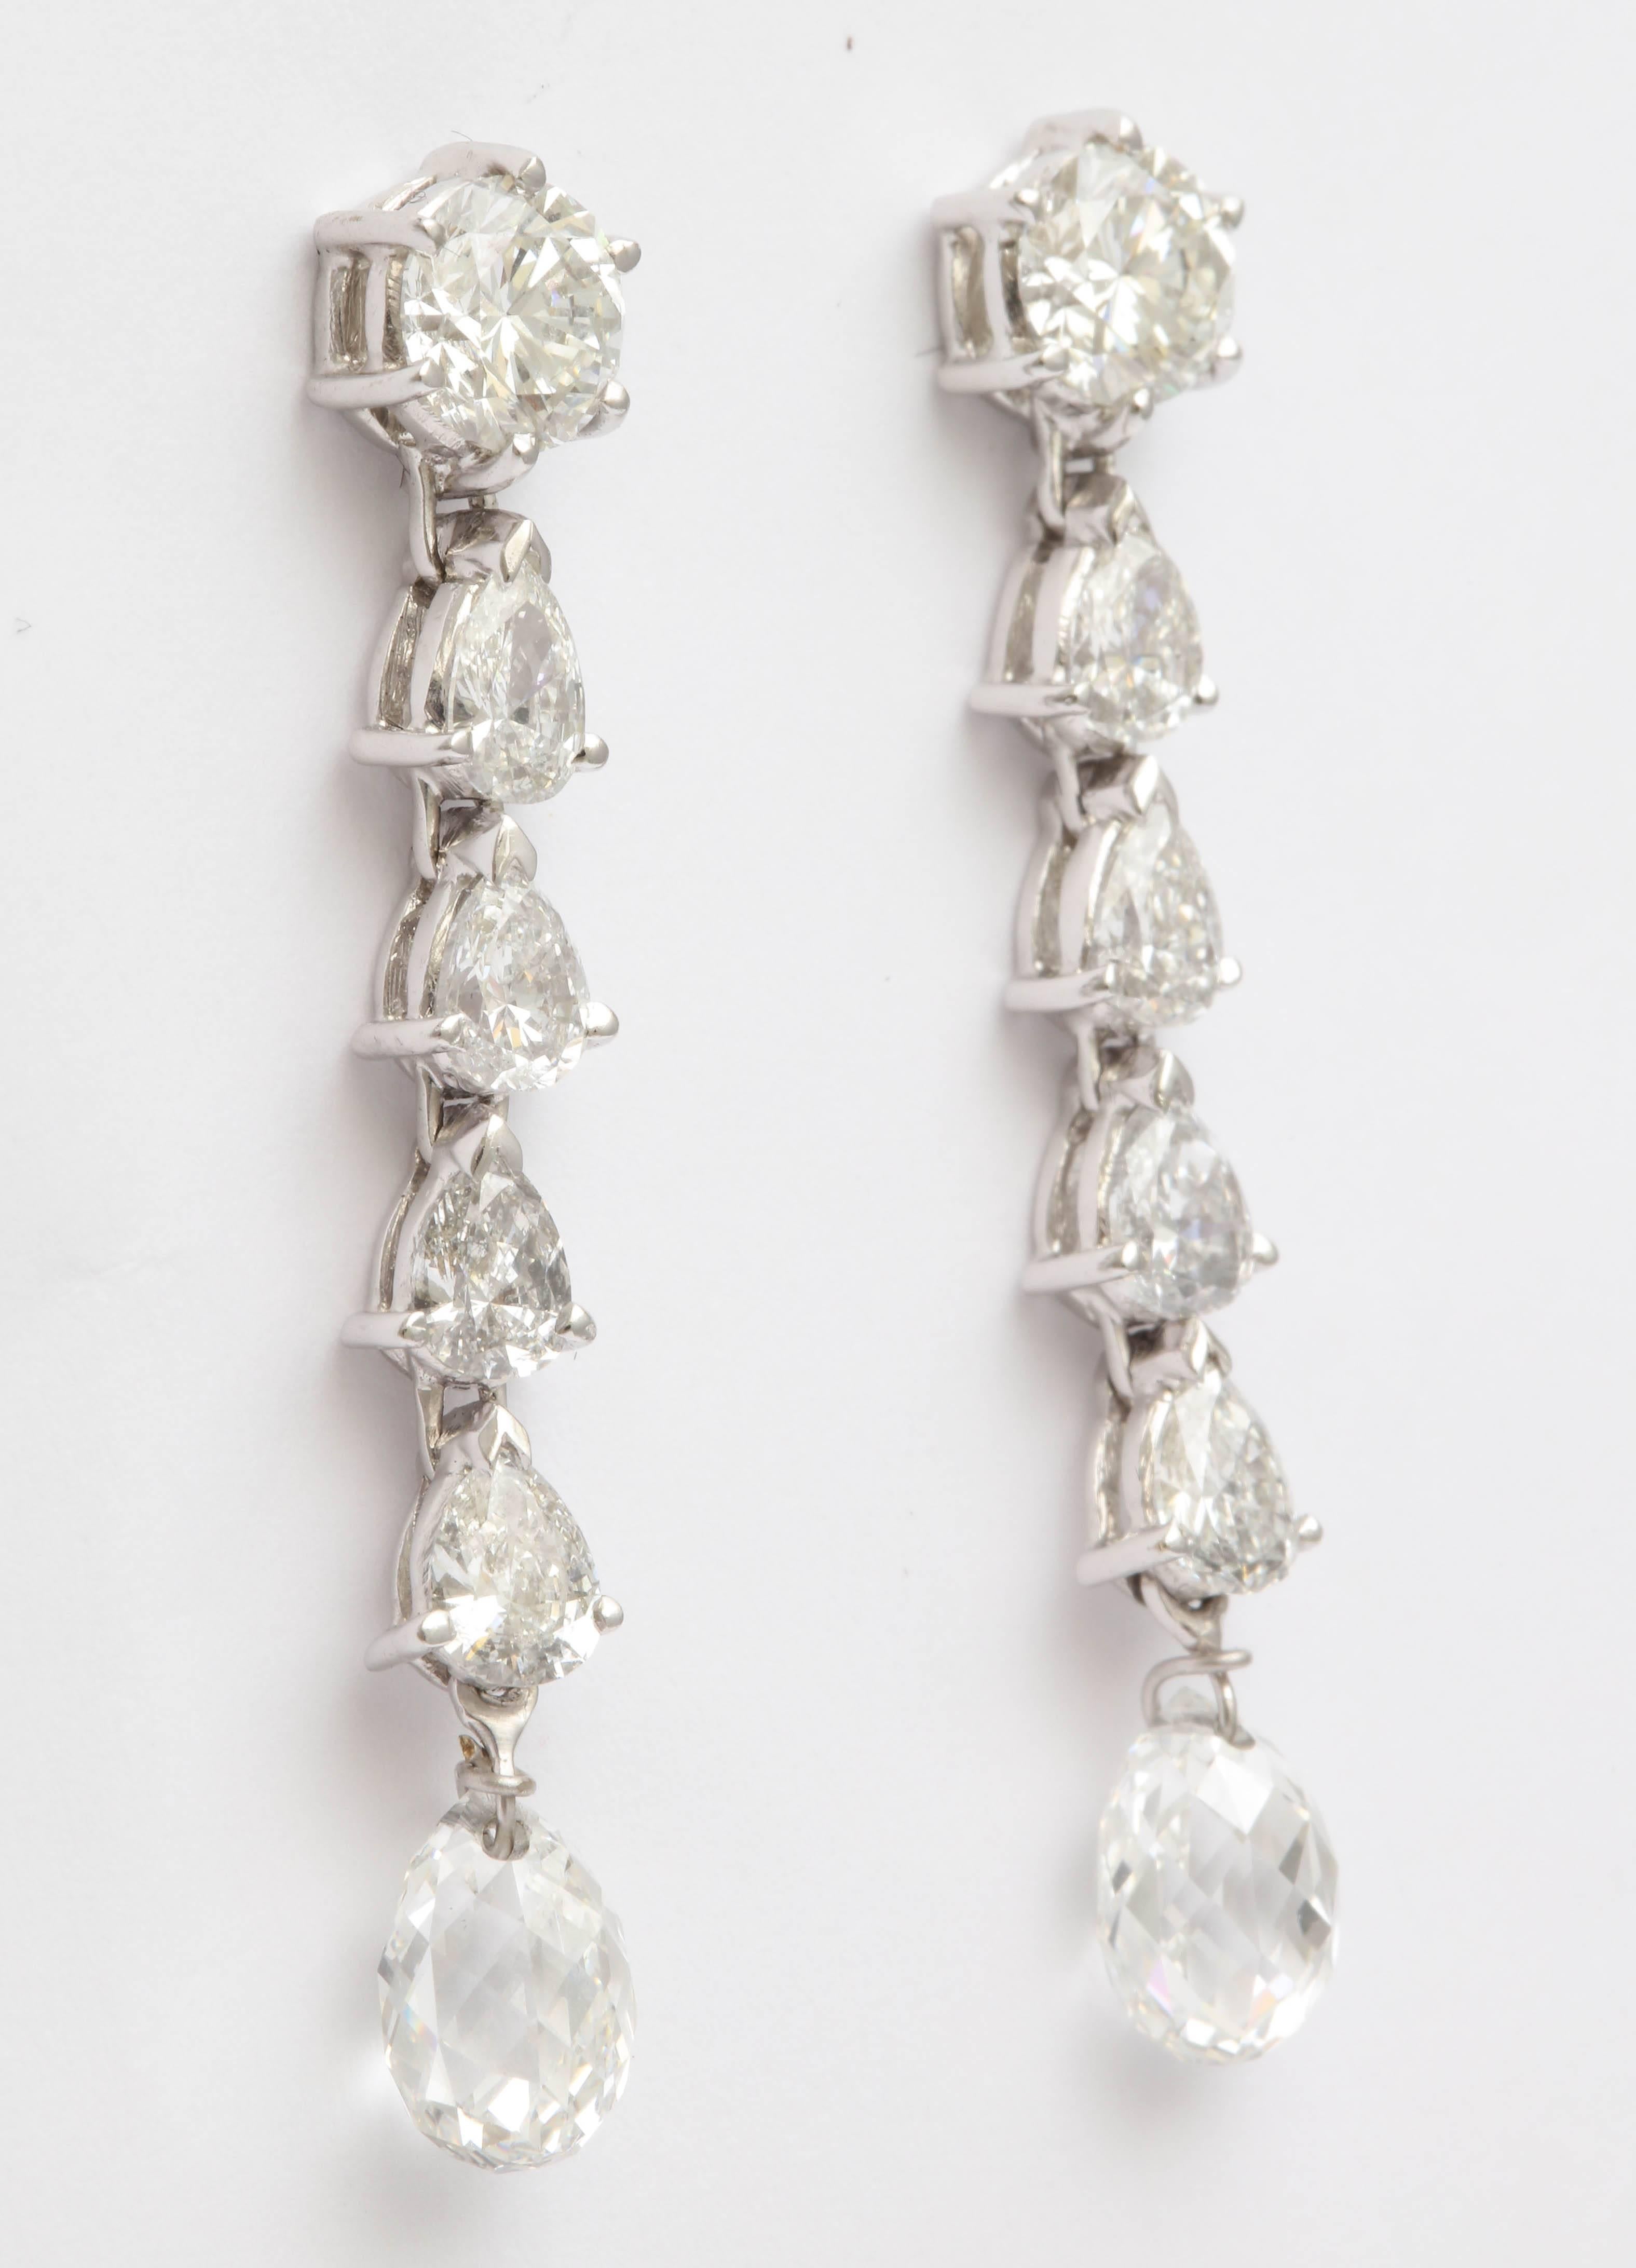 Fancy cut Diamond Drop Earrings - each made up of 1 Round Brilliant, 4 Pears and terminating in 1 oval cut.  Approximate total weight over 3.5cts.  Very elegant and fluid in movement. Perfect for light cocktails or evening wear.   